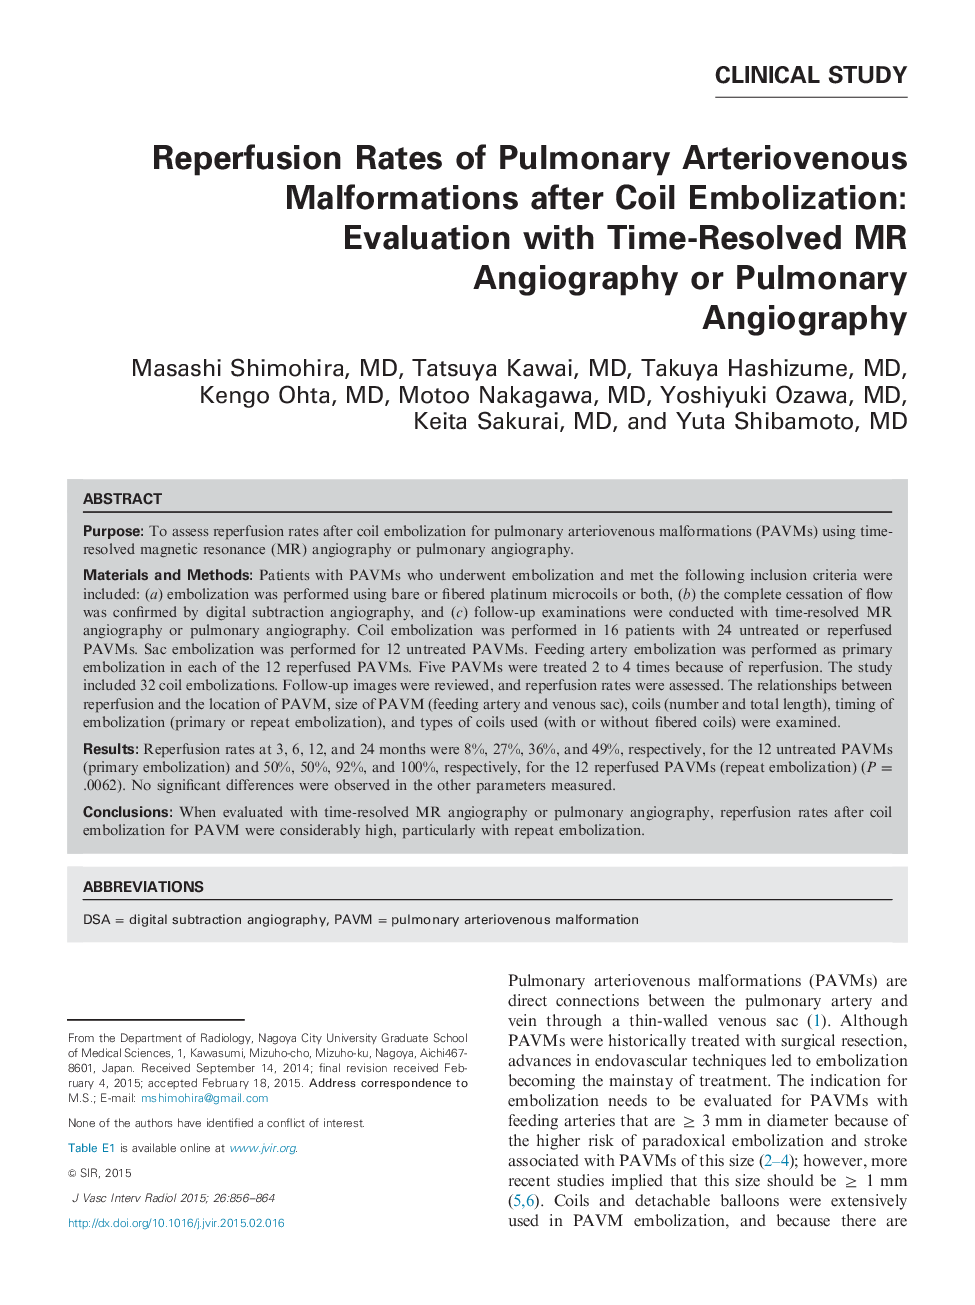 Reperfusion Rates of Pulmonary Arteriovenous Malformations after Coil Embolization: Evaluation with Time-Resolved MR Angiography or Pulmonary Angiography